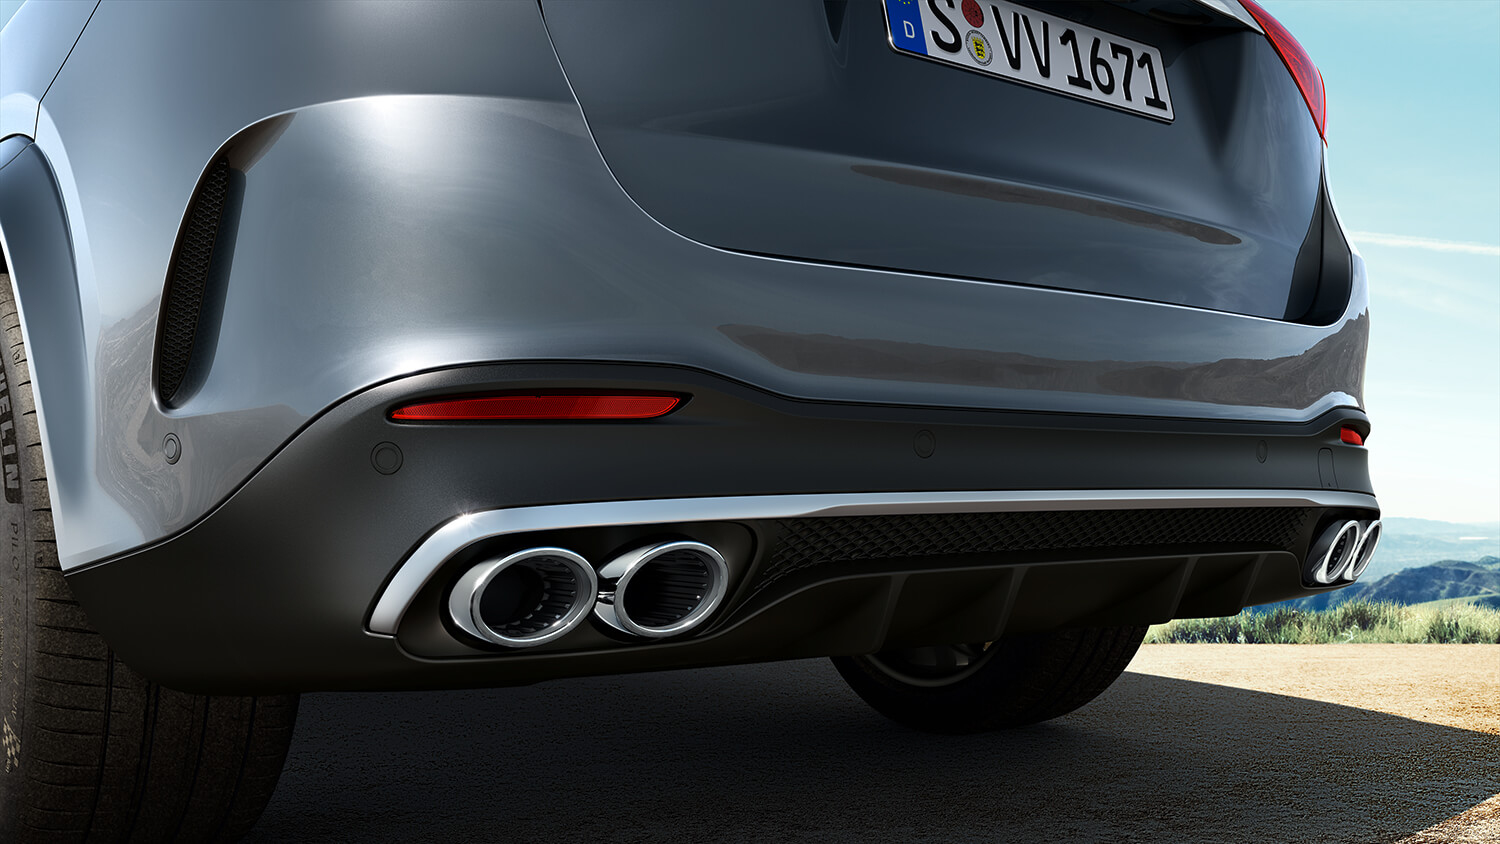 AMG exhaust system